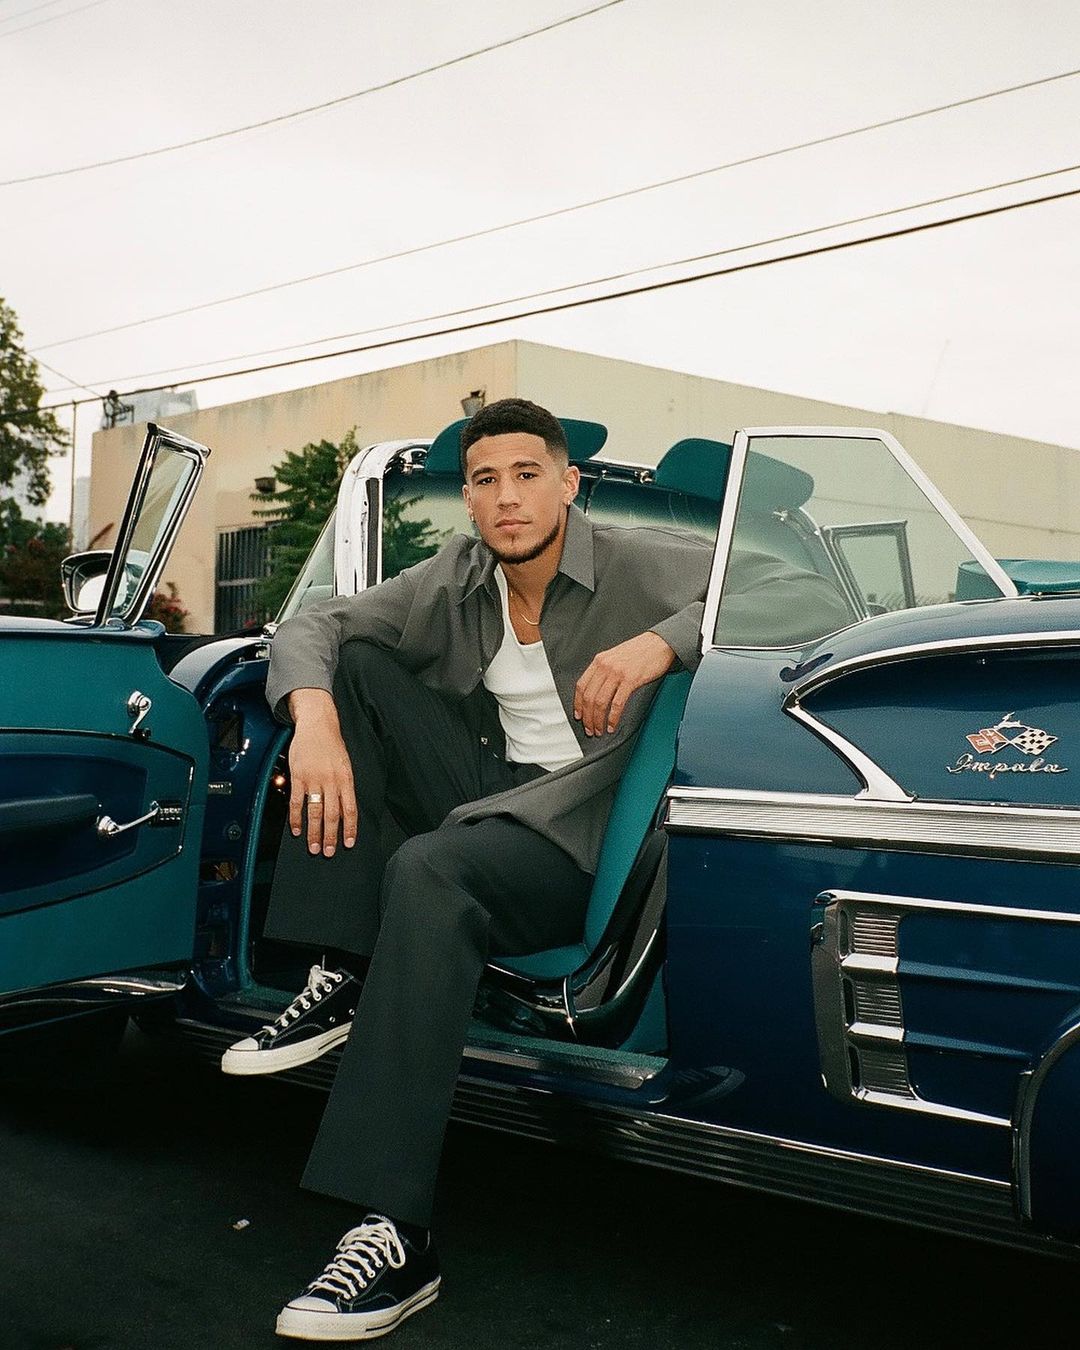 Ferrari 488 Spider to 1959 Chevy Impala: Lakers' next opponent Devin Booker’s Classic Car Collection